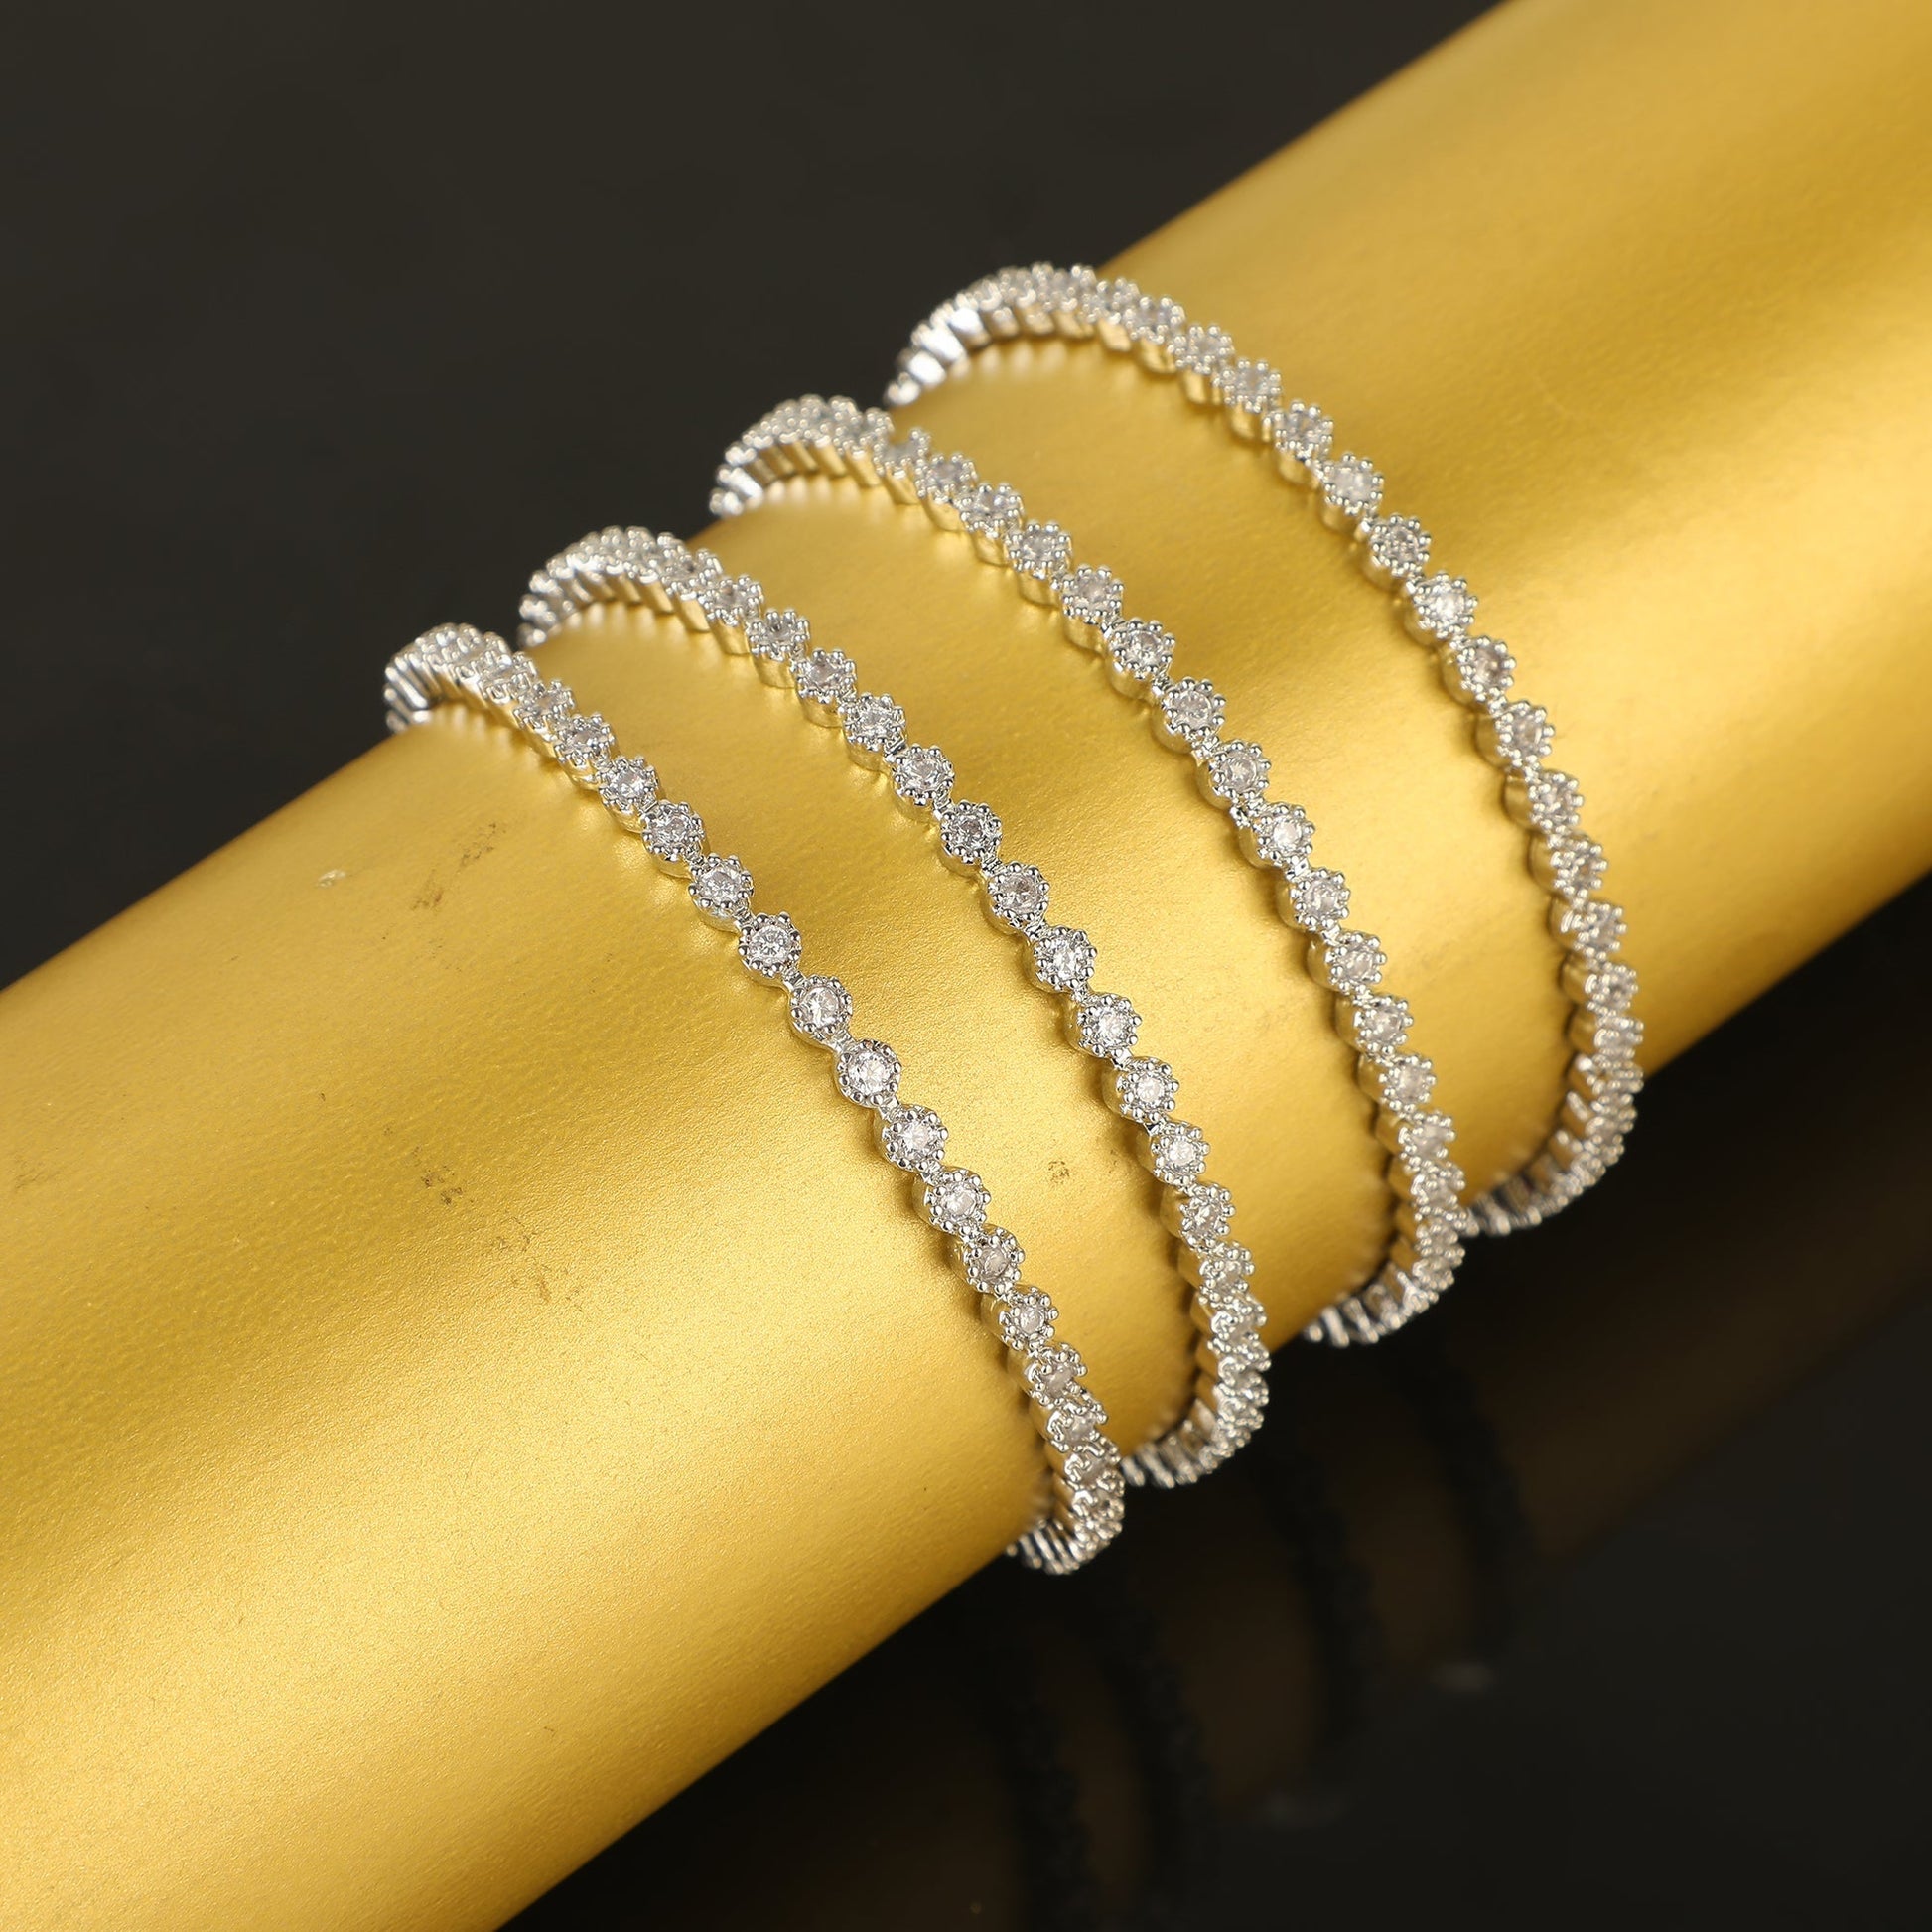 Bhagya Lakshmi Gold Plated Bangles Collection - Shop Now!